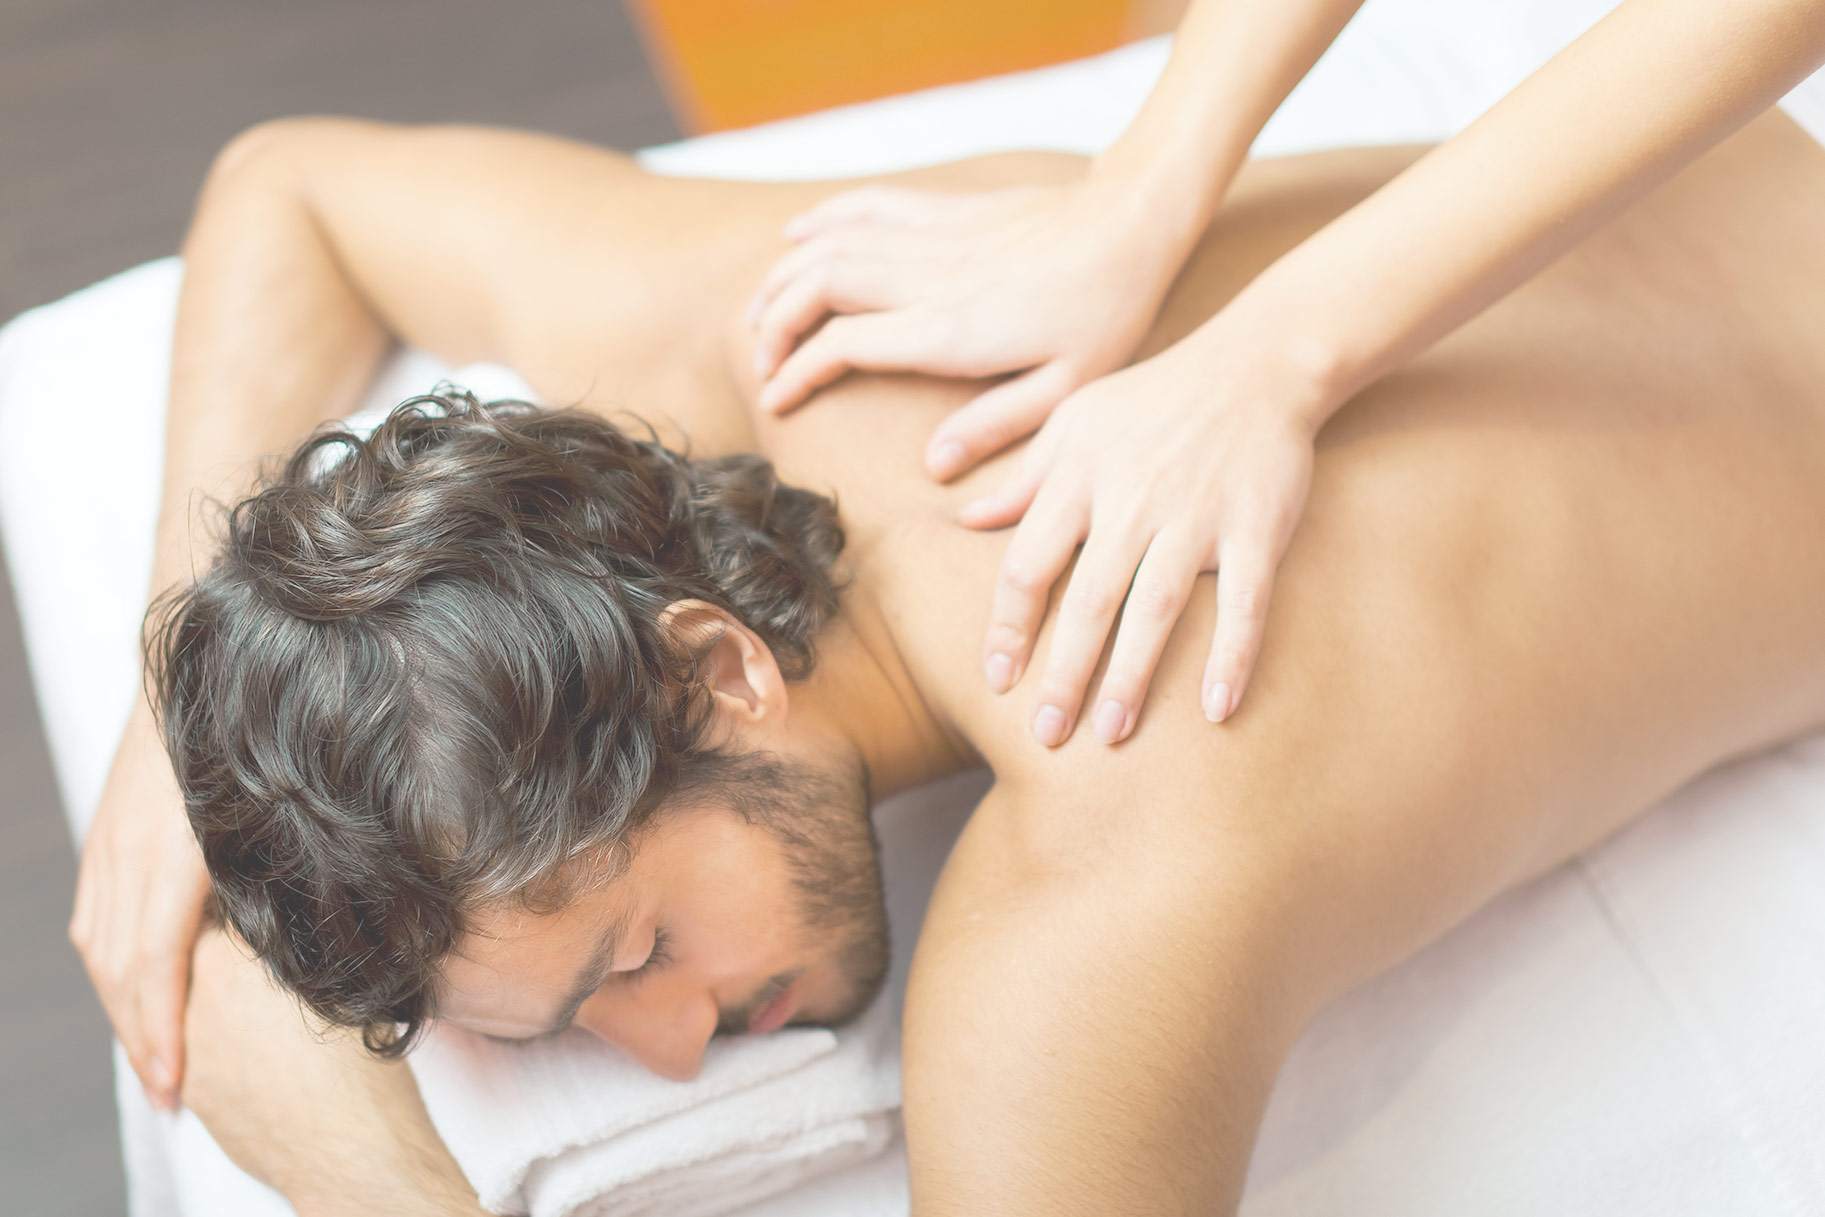 Best of Where to find happy ending massage